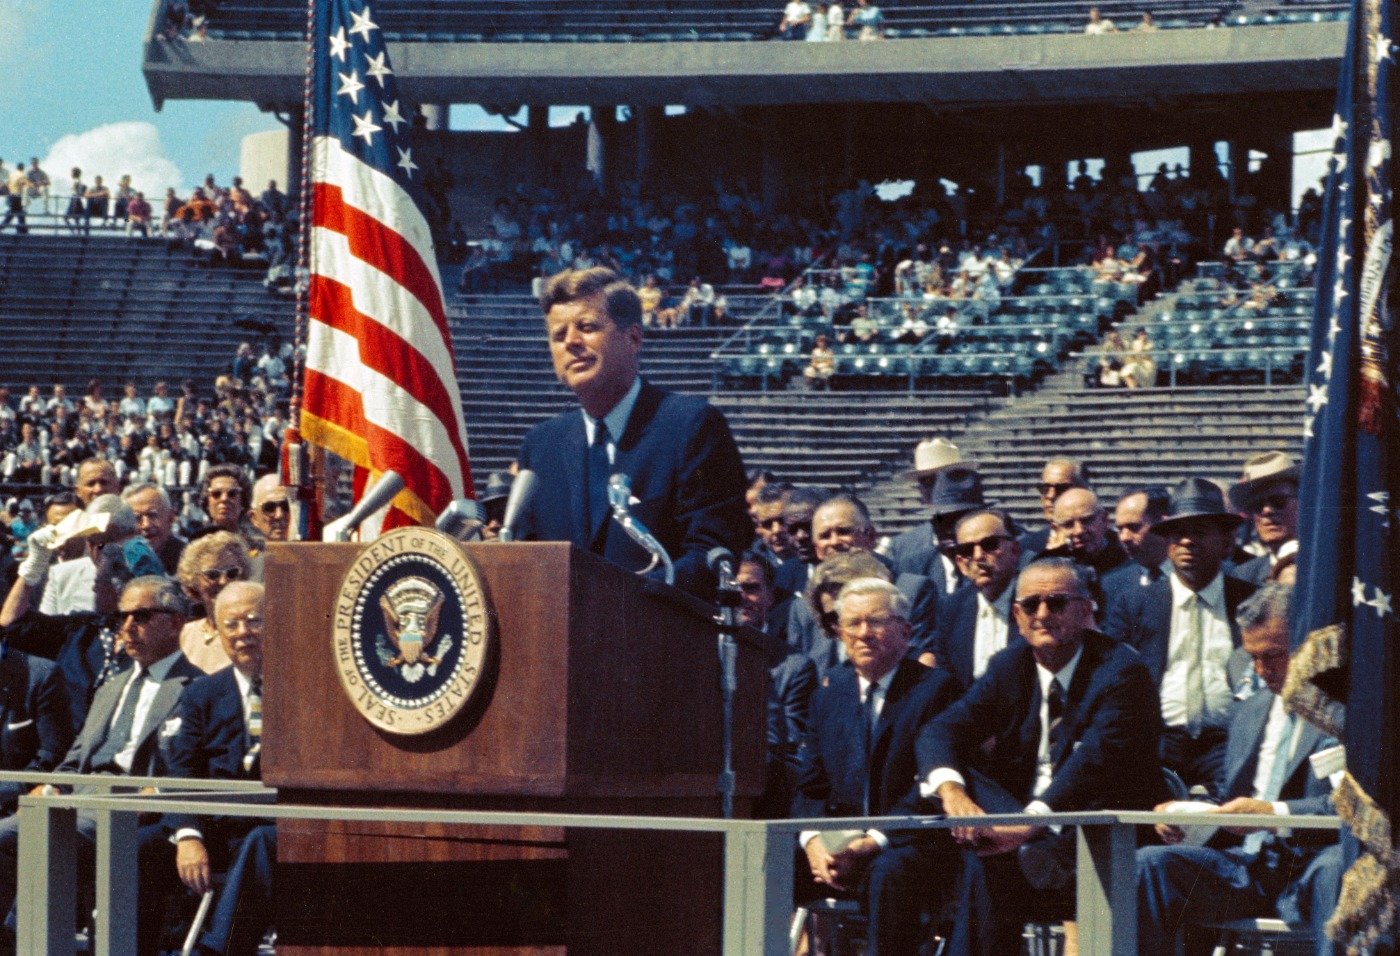 President Kennedy speaking at Rice